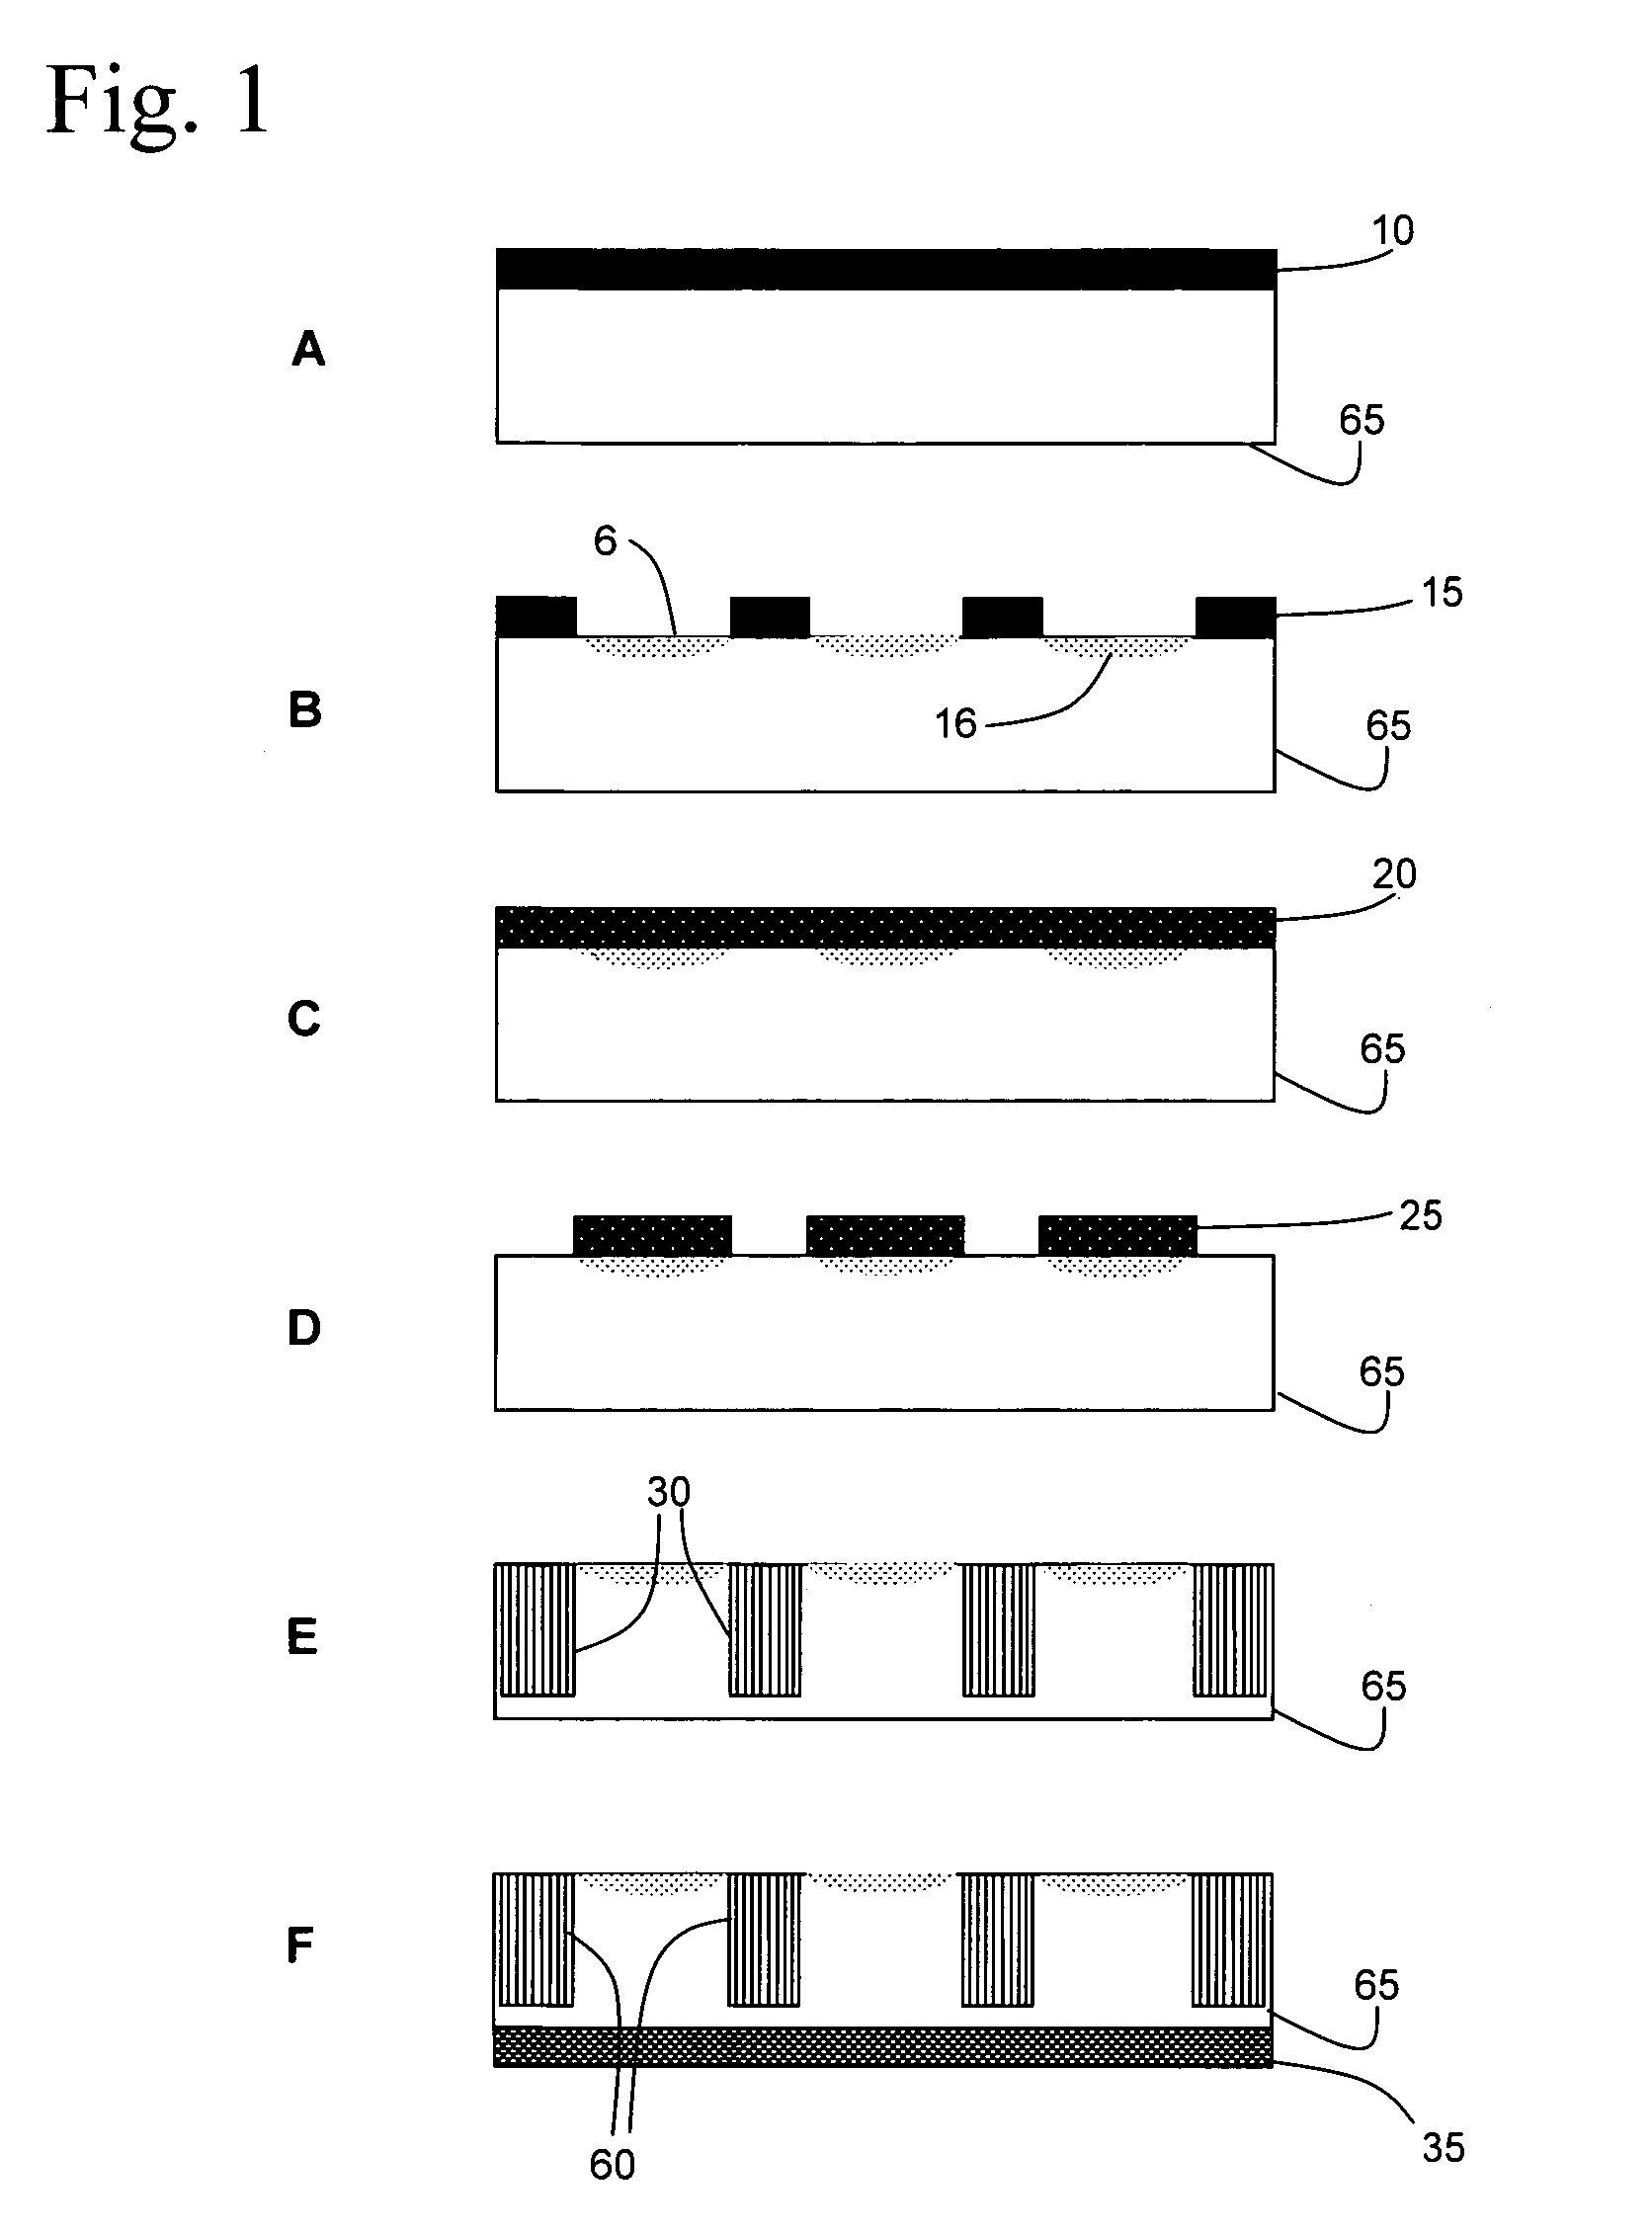 Method for the assembly of nanowire interconnects